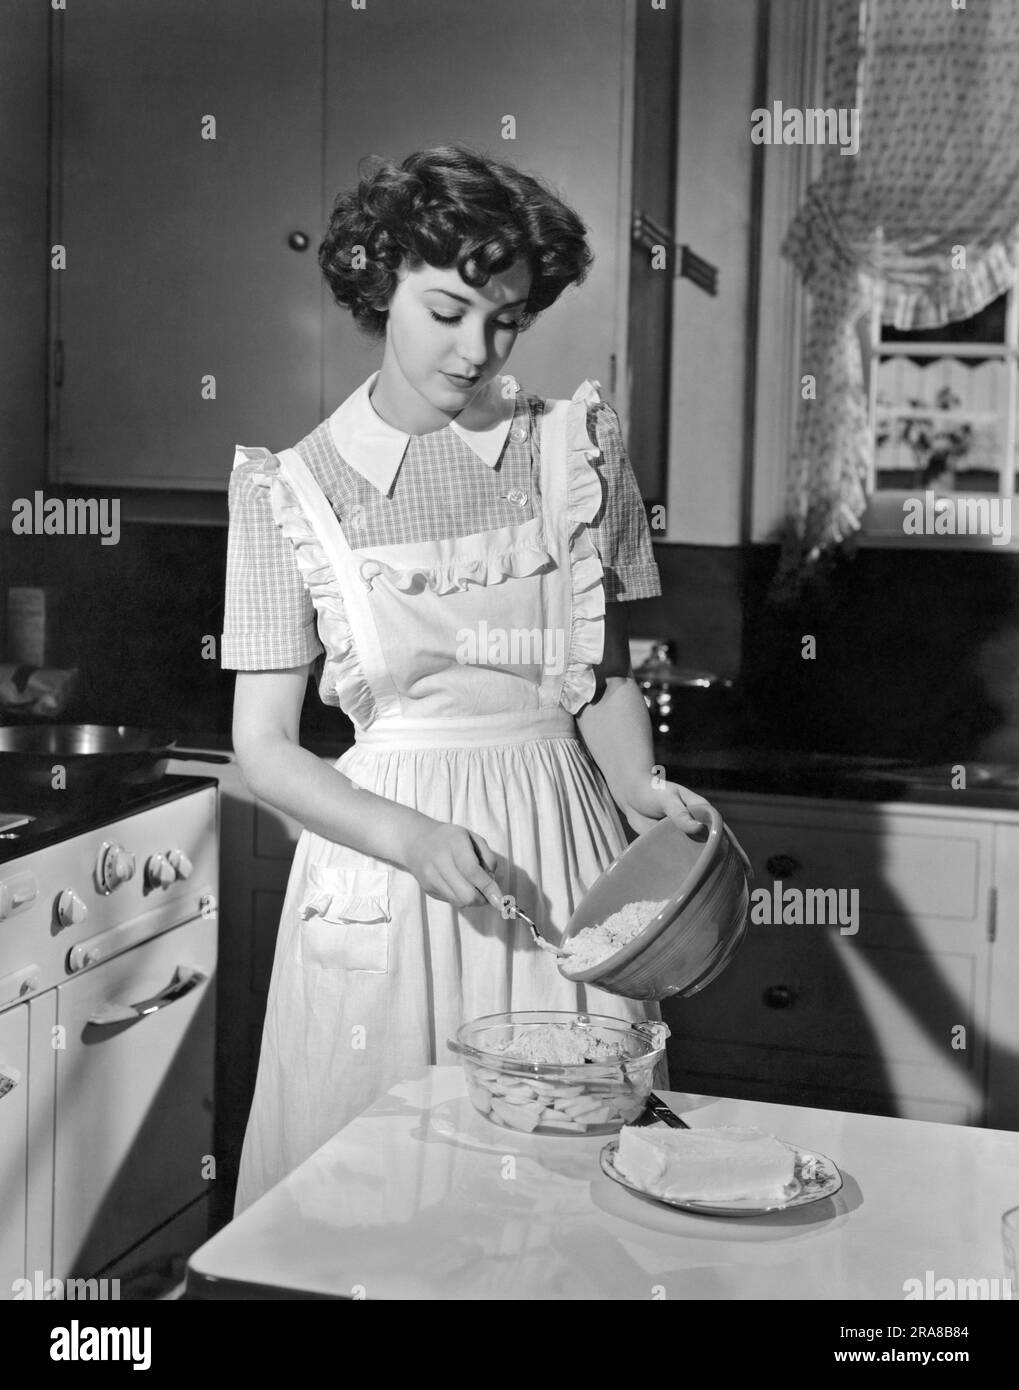 Hollywood, California:  1942. Actress Marsha Hunt prepares apple cobbler in her kitchen. She was blacklisted during the 1940's and 50's for her First Amendment stands. Stock Photo